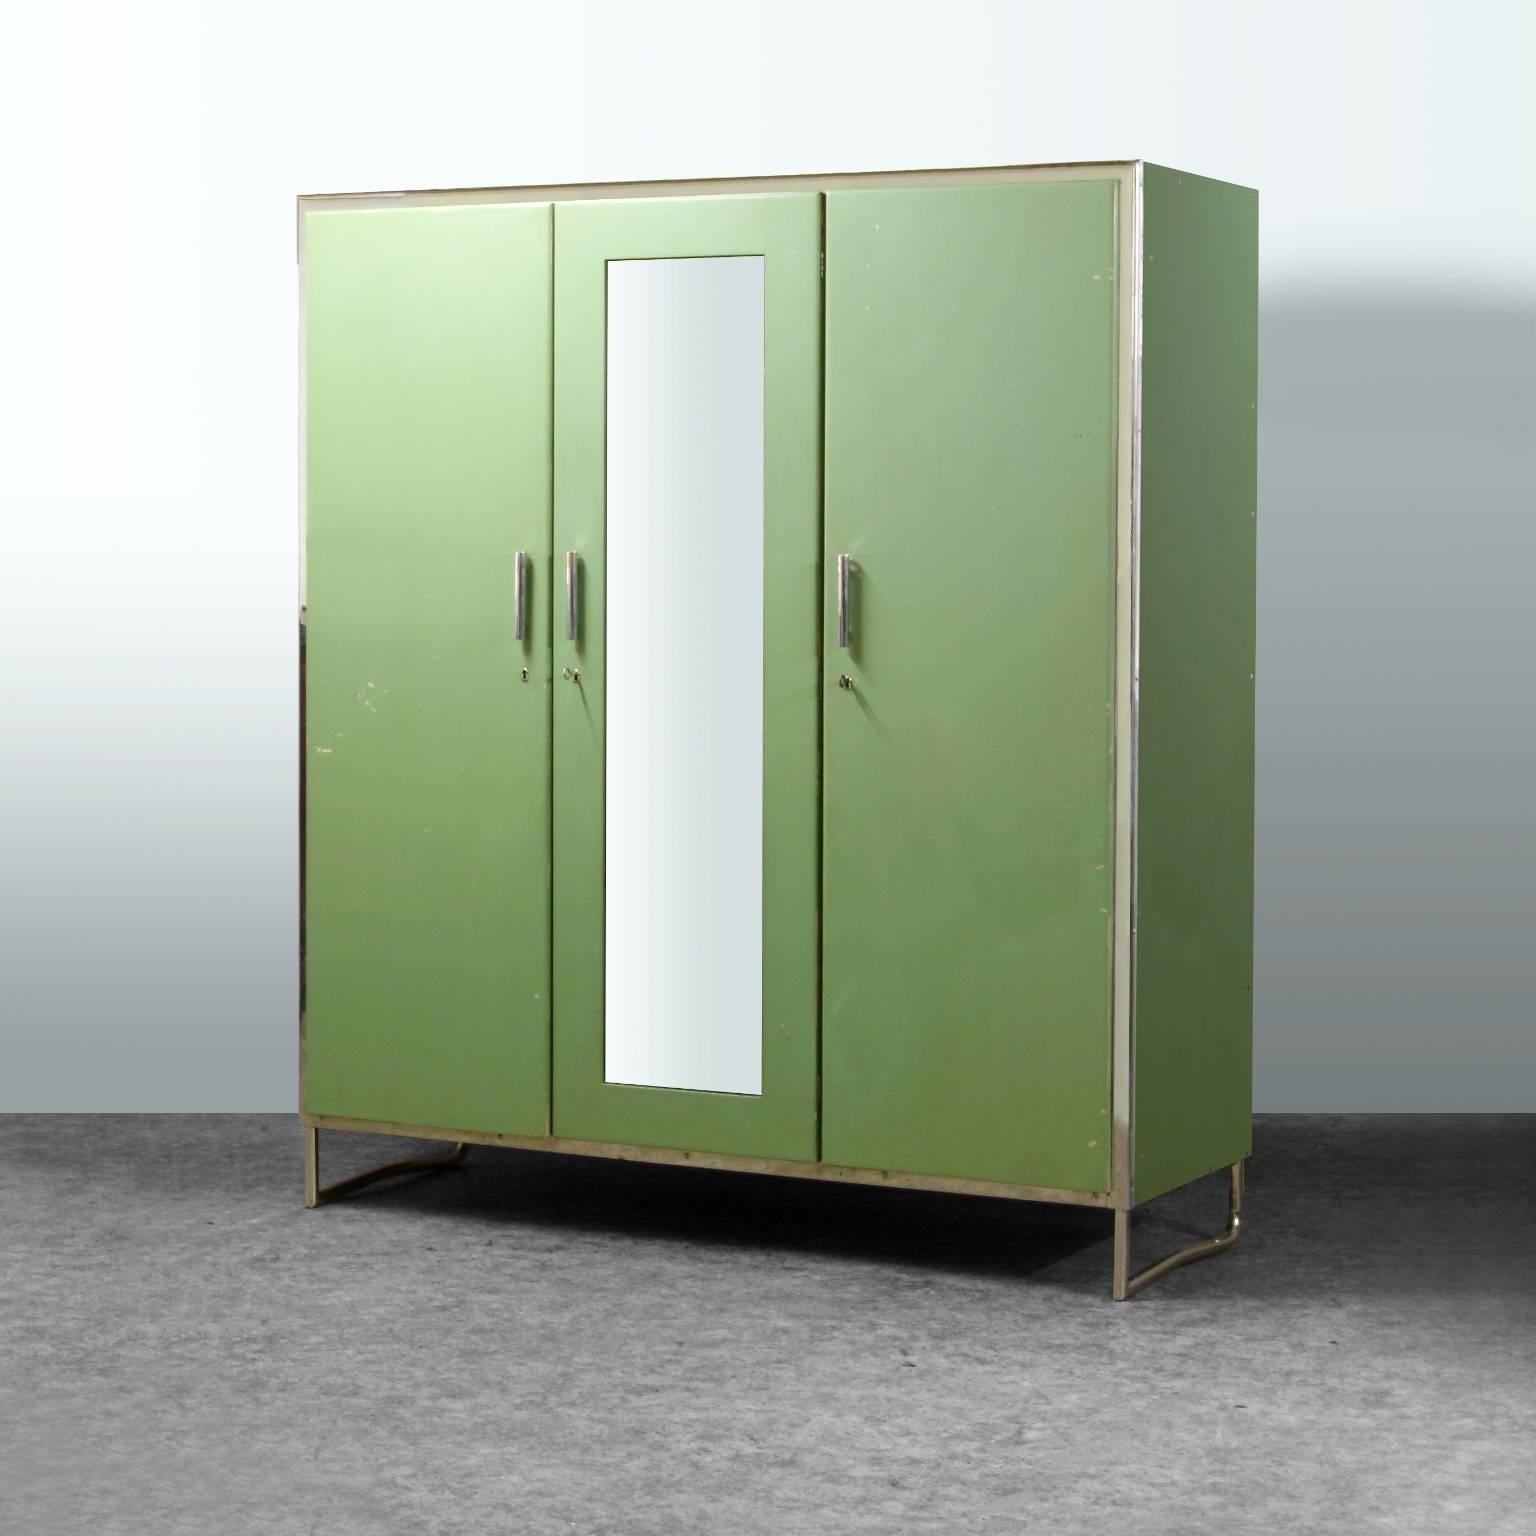 Three-door wardrobe, chrome-plated steel and wood in its original green lacquer, Czech Modernism, circa 1930.